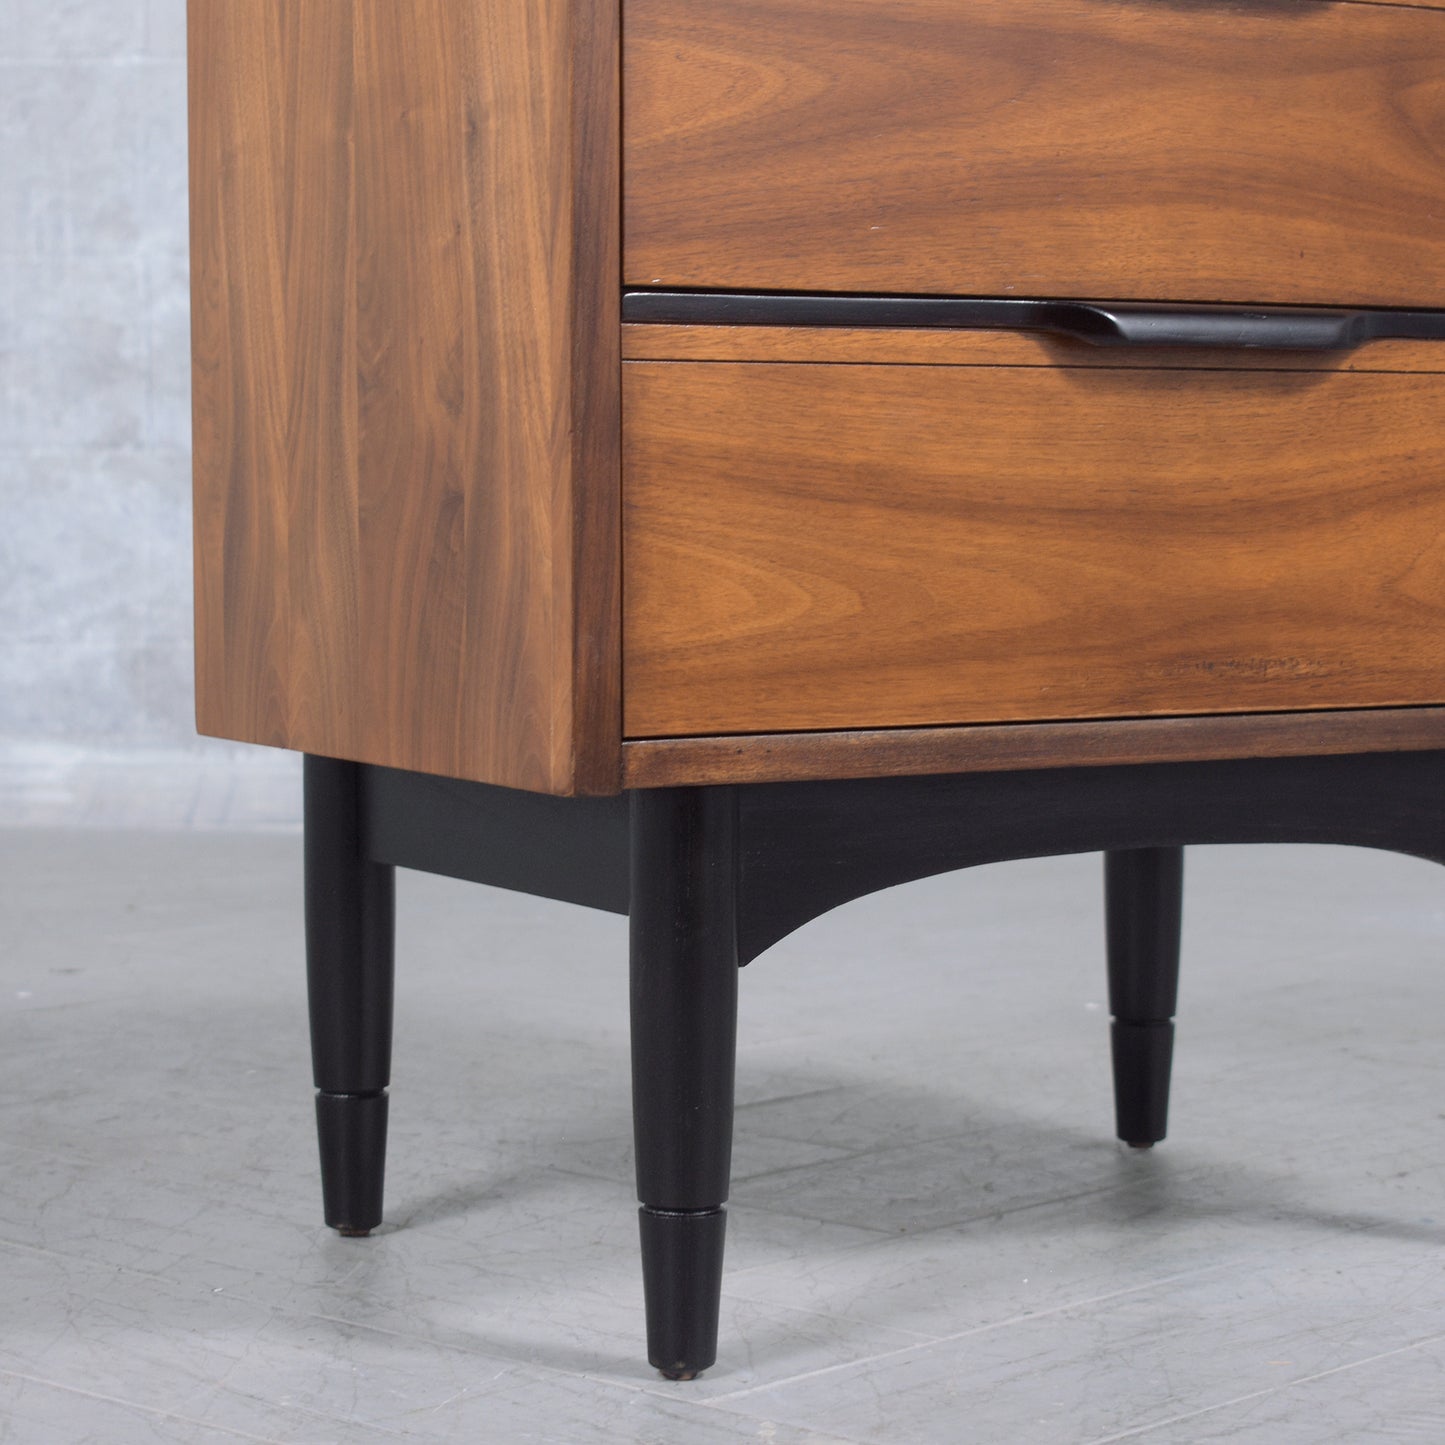 1960s Mid-Century Modern Walnut Nightstand: Ebonized Finish with Carved Details